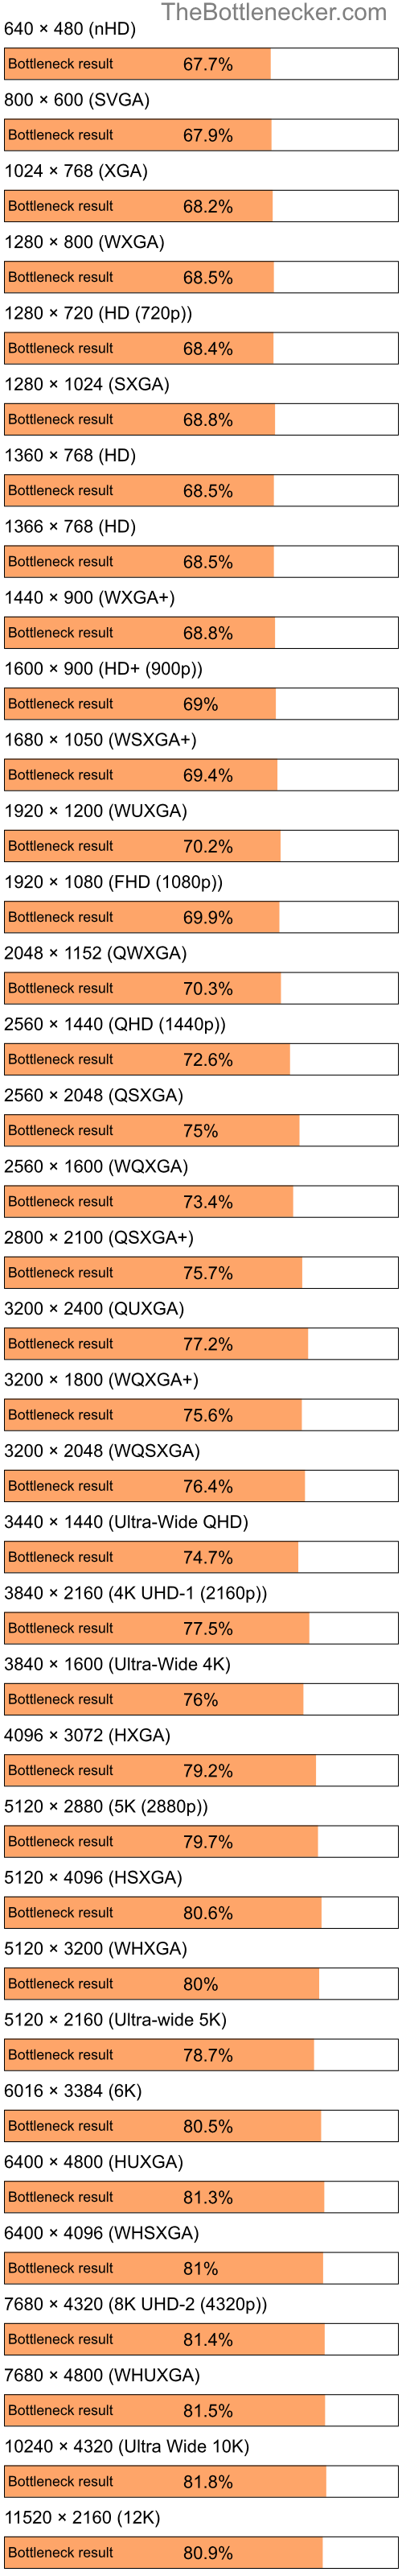 Bottleneck results by resolution for Intel Atom Z520 and AMD Radeon X700 PRO in7 Days to Die